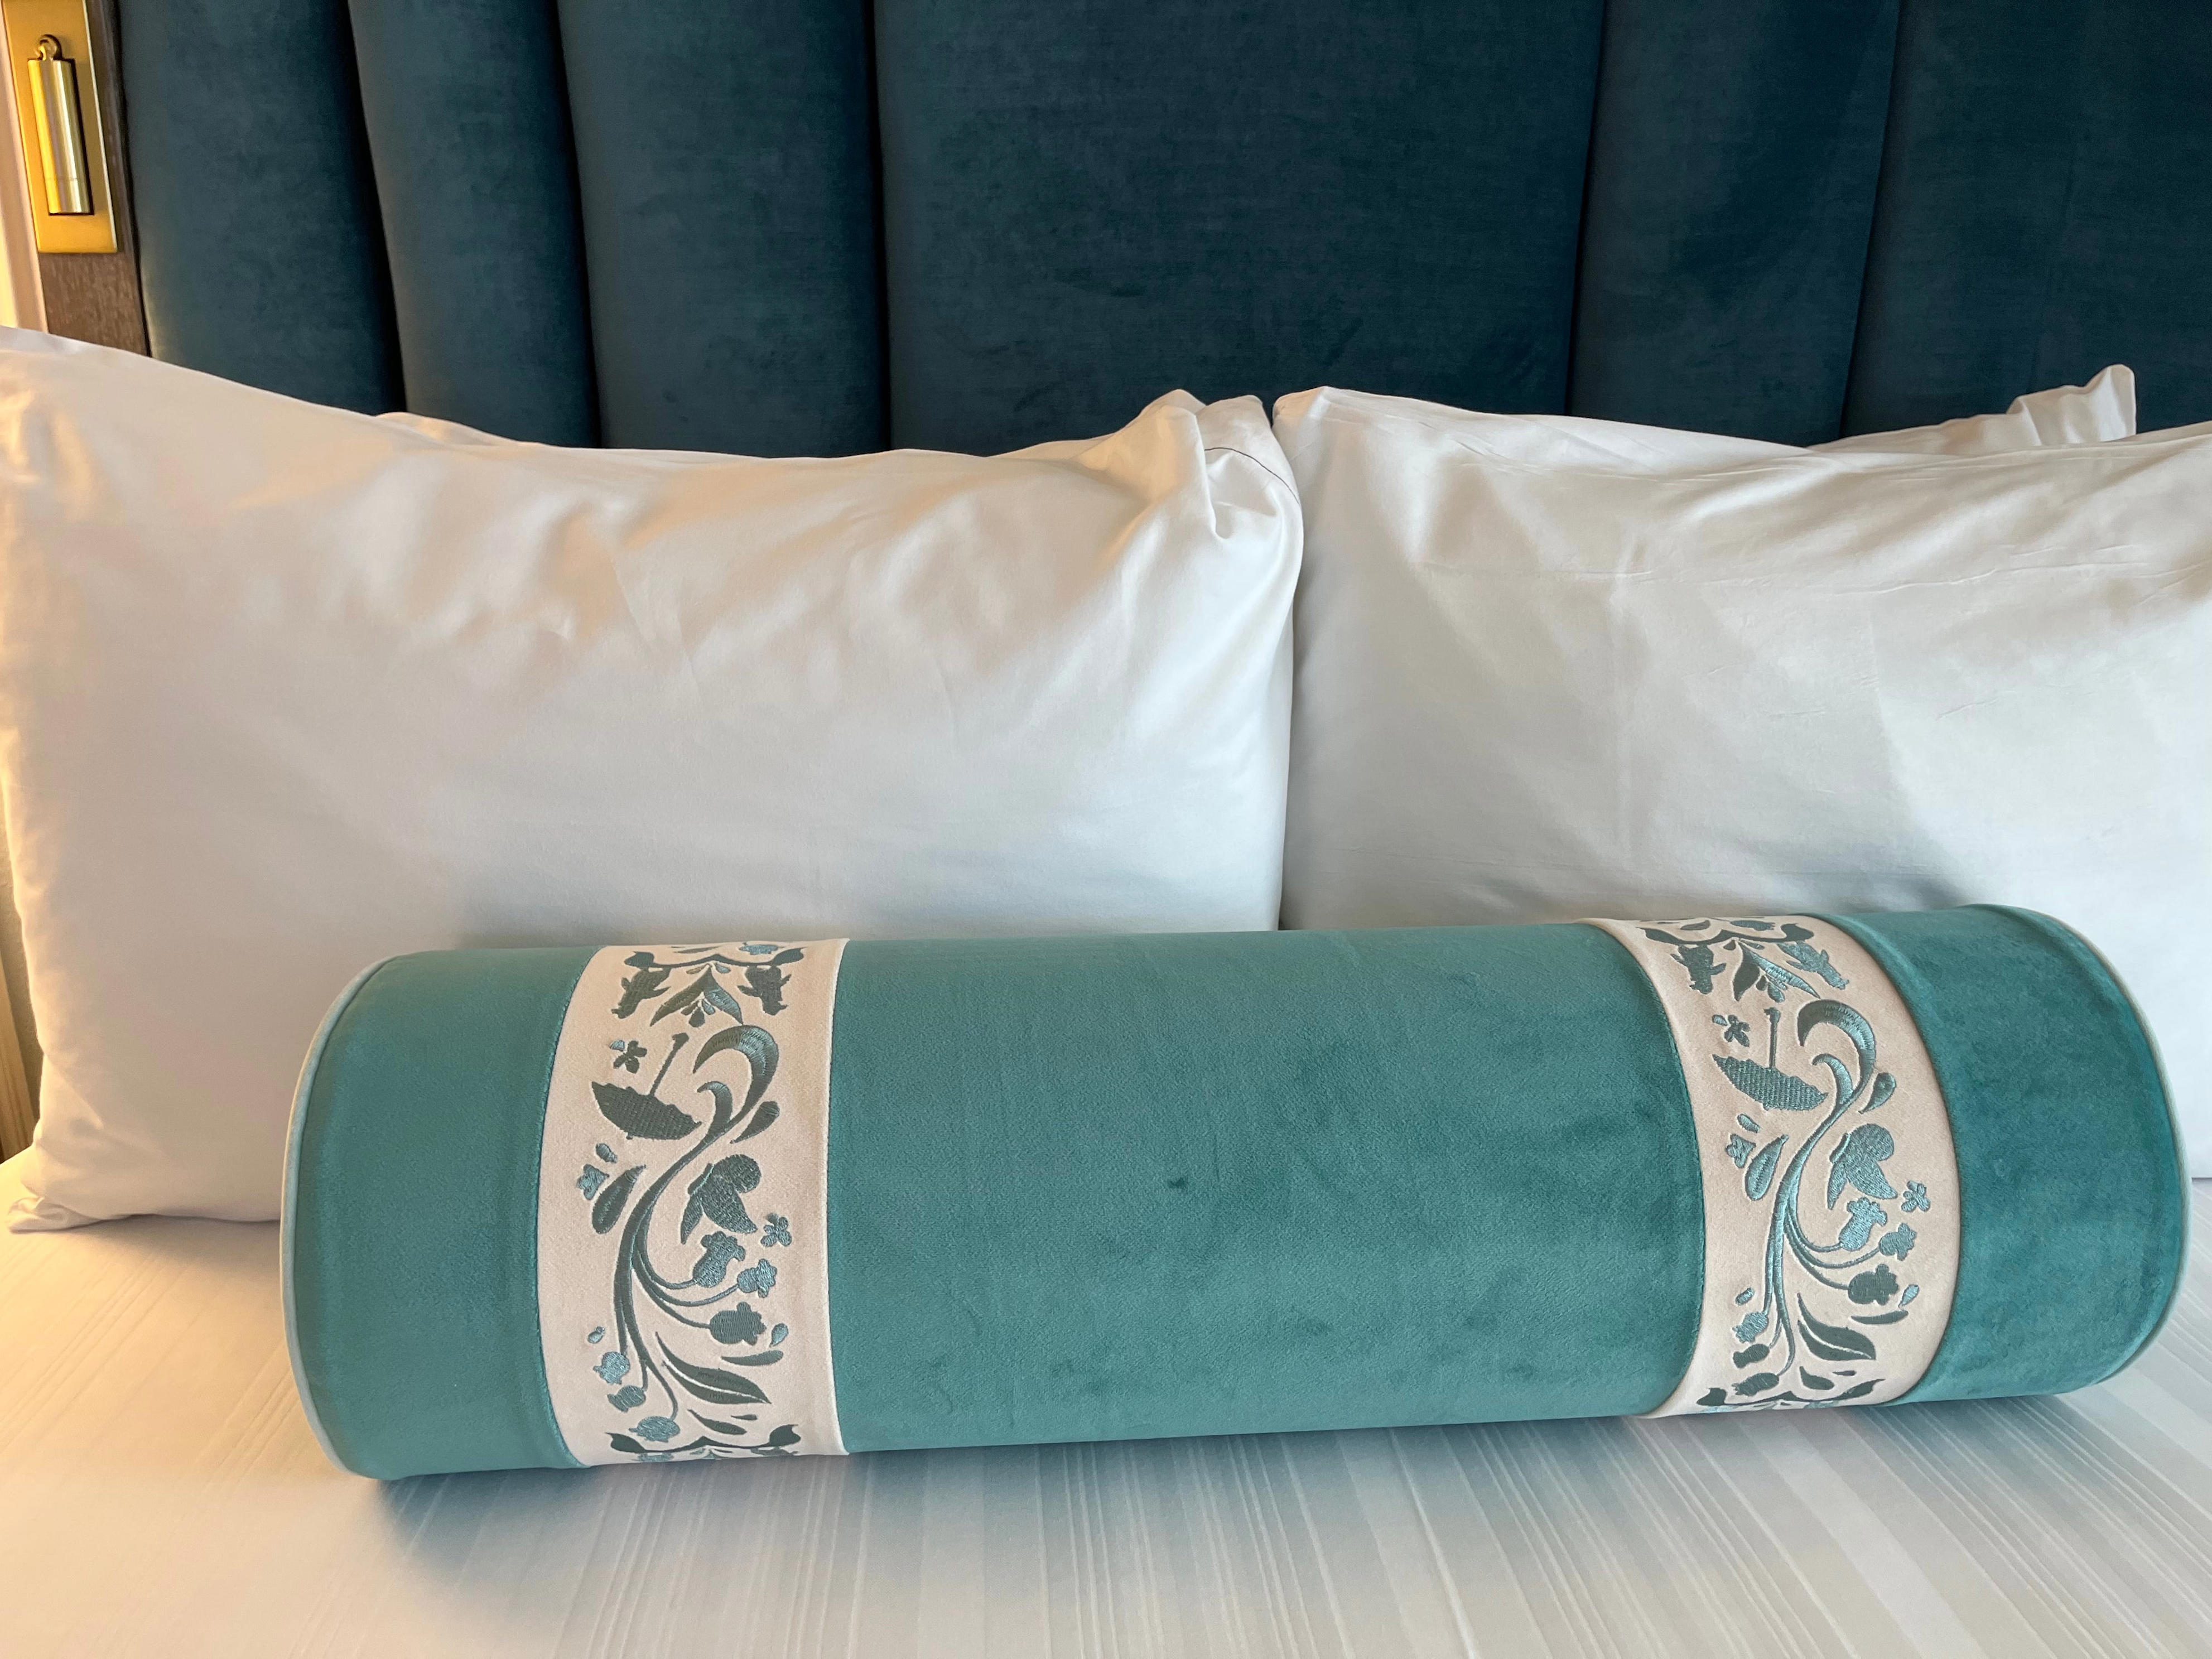 <p>I'm quite specific when it comes to mattresses and pillows. But the bed was the most comfortable I've ever experienced at a Disney resort. </p><p>Even when taking photos, I immediately noticed how soft the mattress was. My head sunk right into the pillows, which I loved.</p>